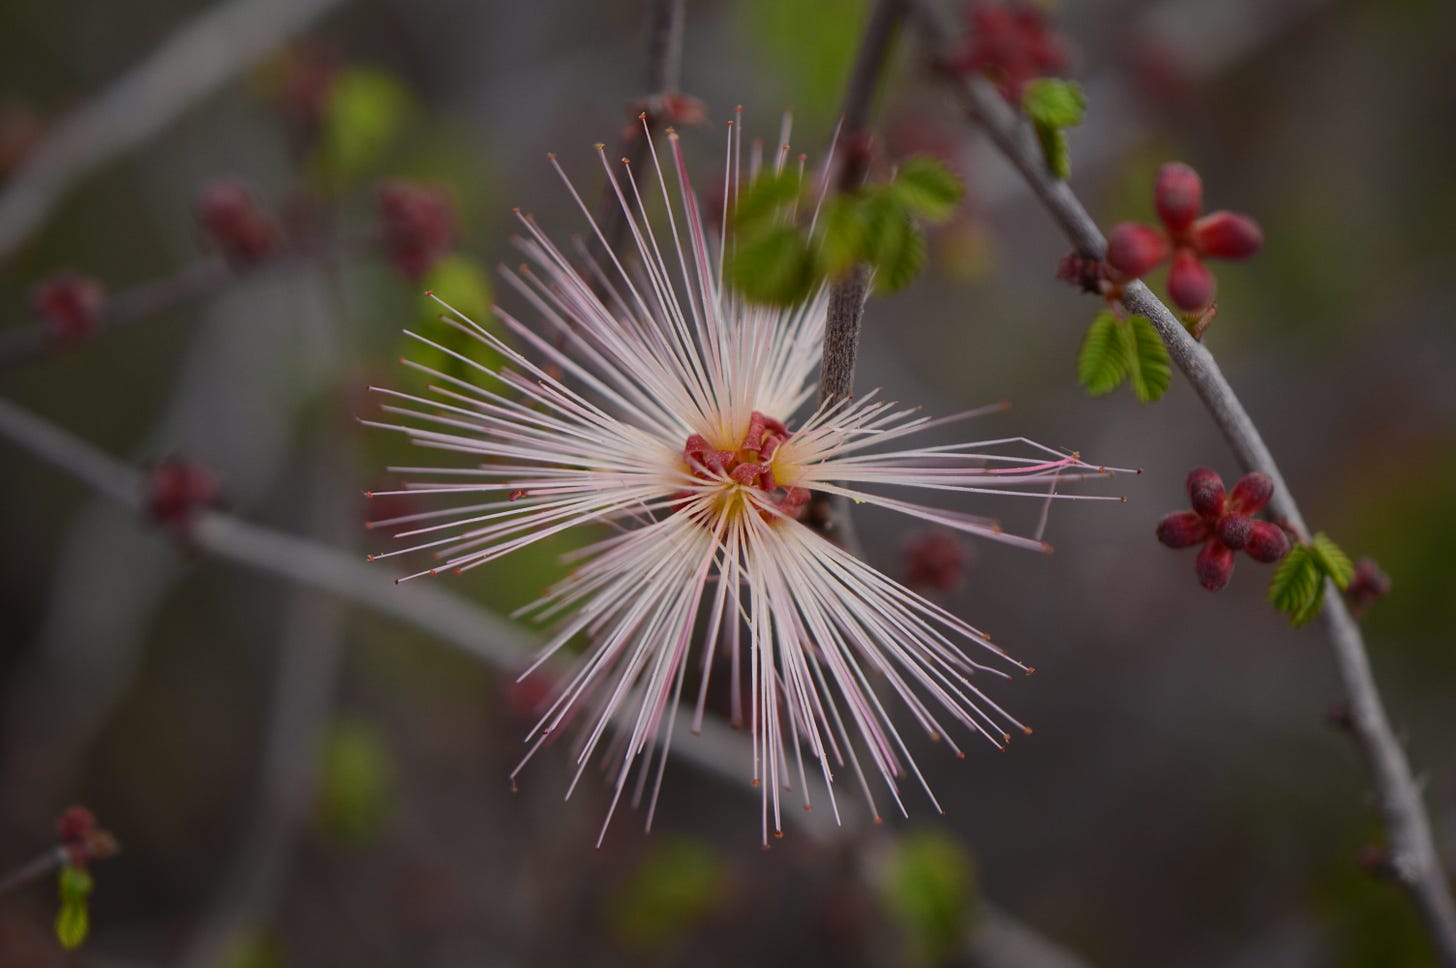 a pale pink starburst of stamens at the center of the picture. Background is gray with spots of green leaf buds and red flower buds.